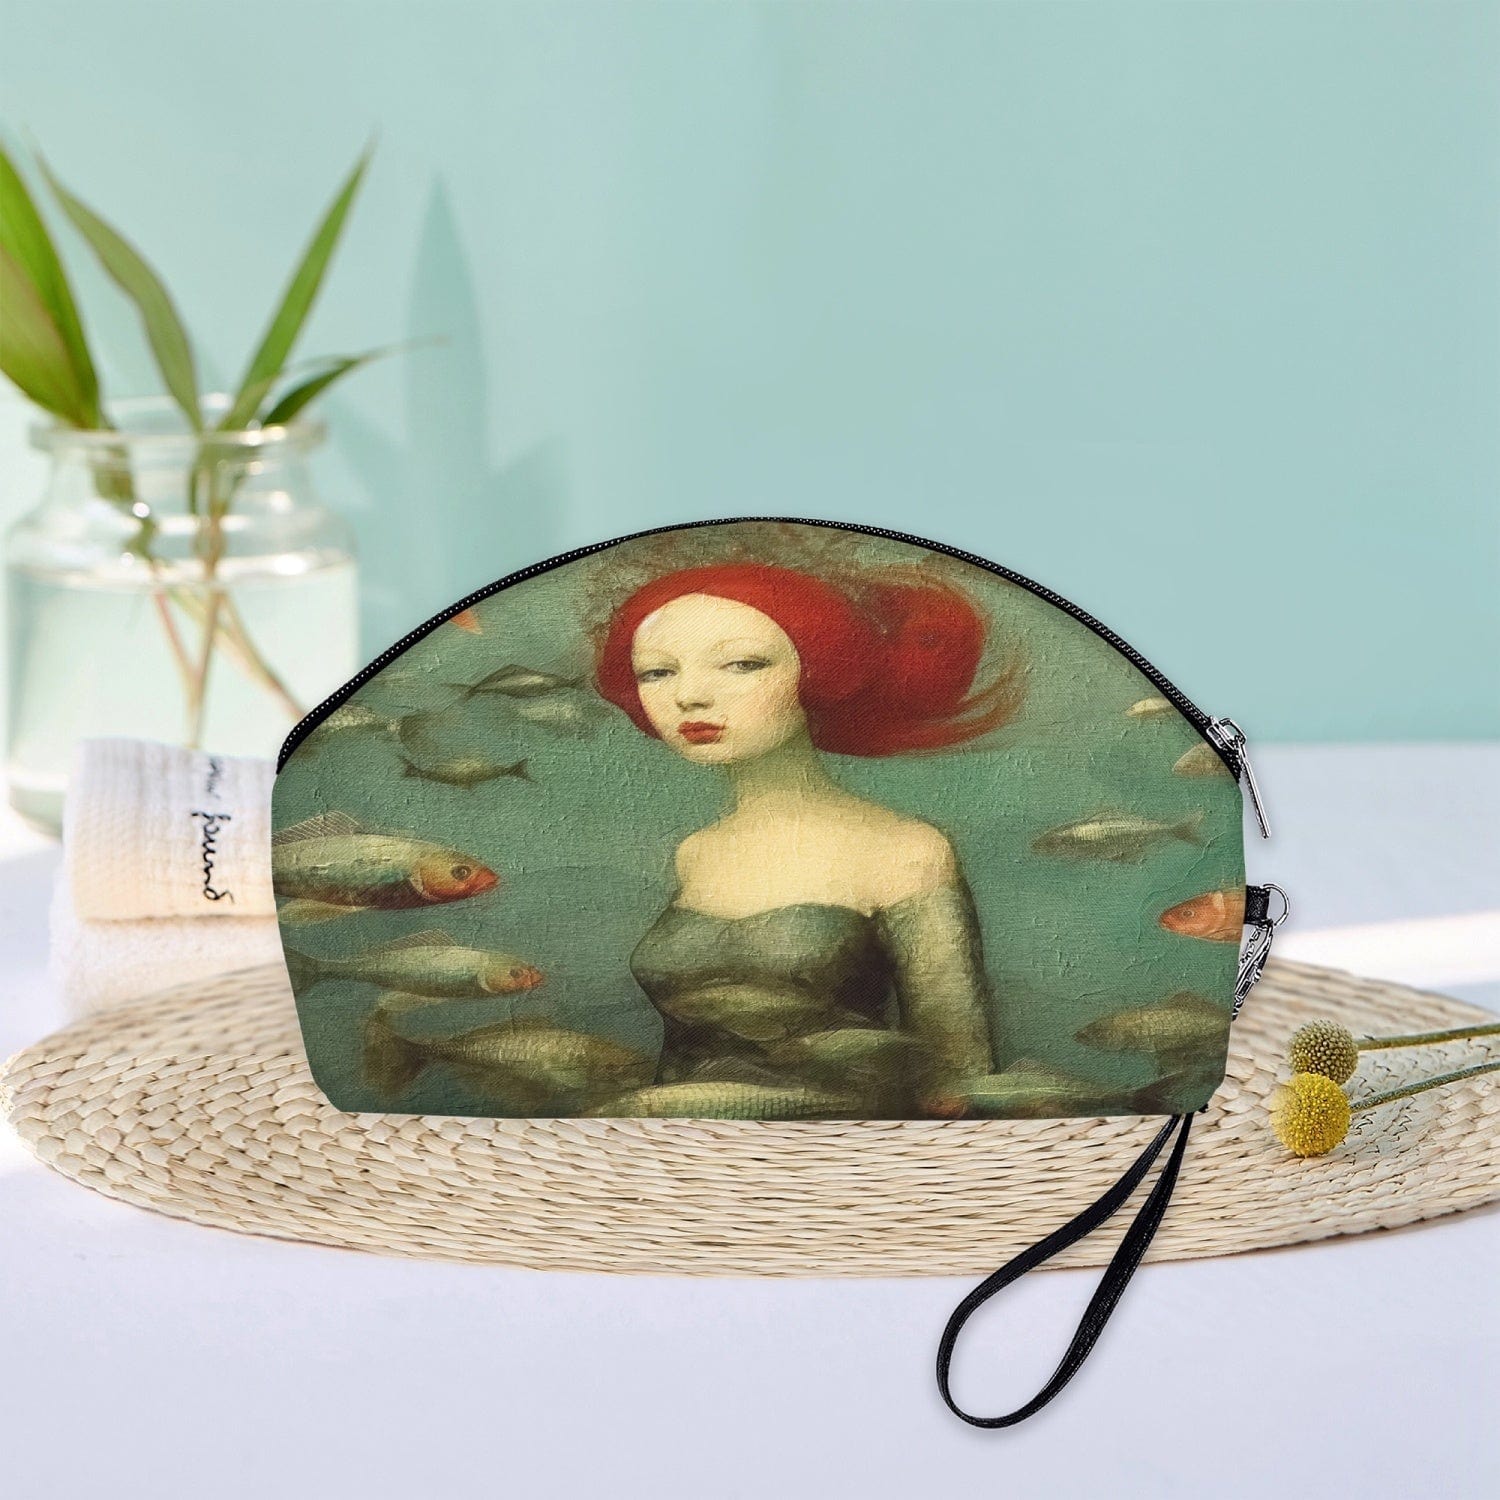 oil painting style makeup purse ideal as a gift for travellers who appreciate the mysteries of the ocean and mermaids, colour palette of sage and sea greens, reds, creams shown in a bathroom setting